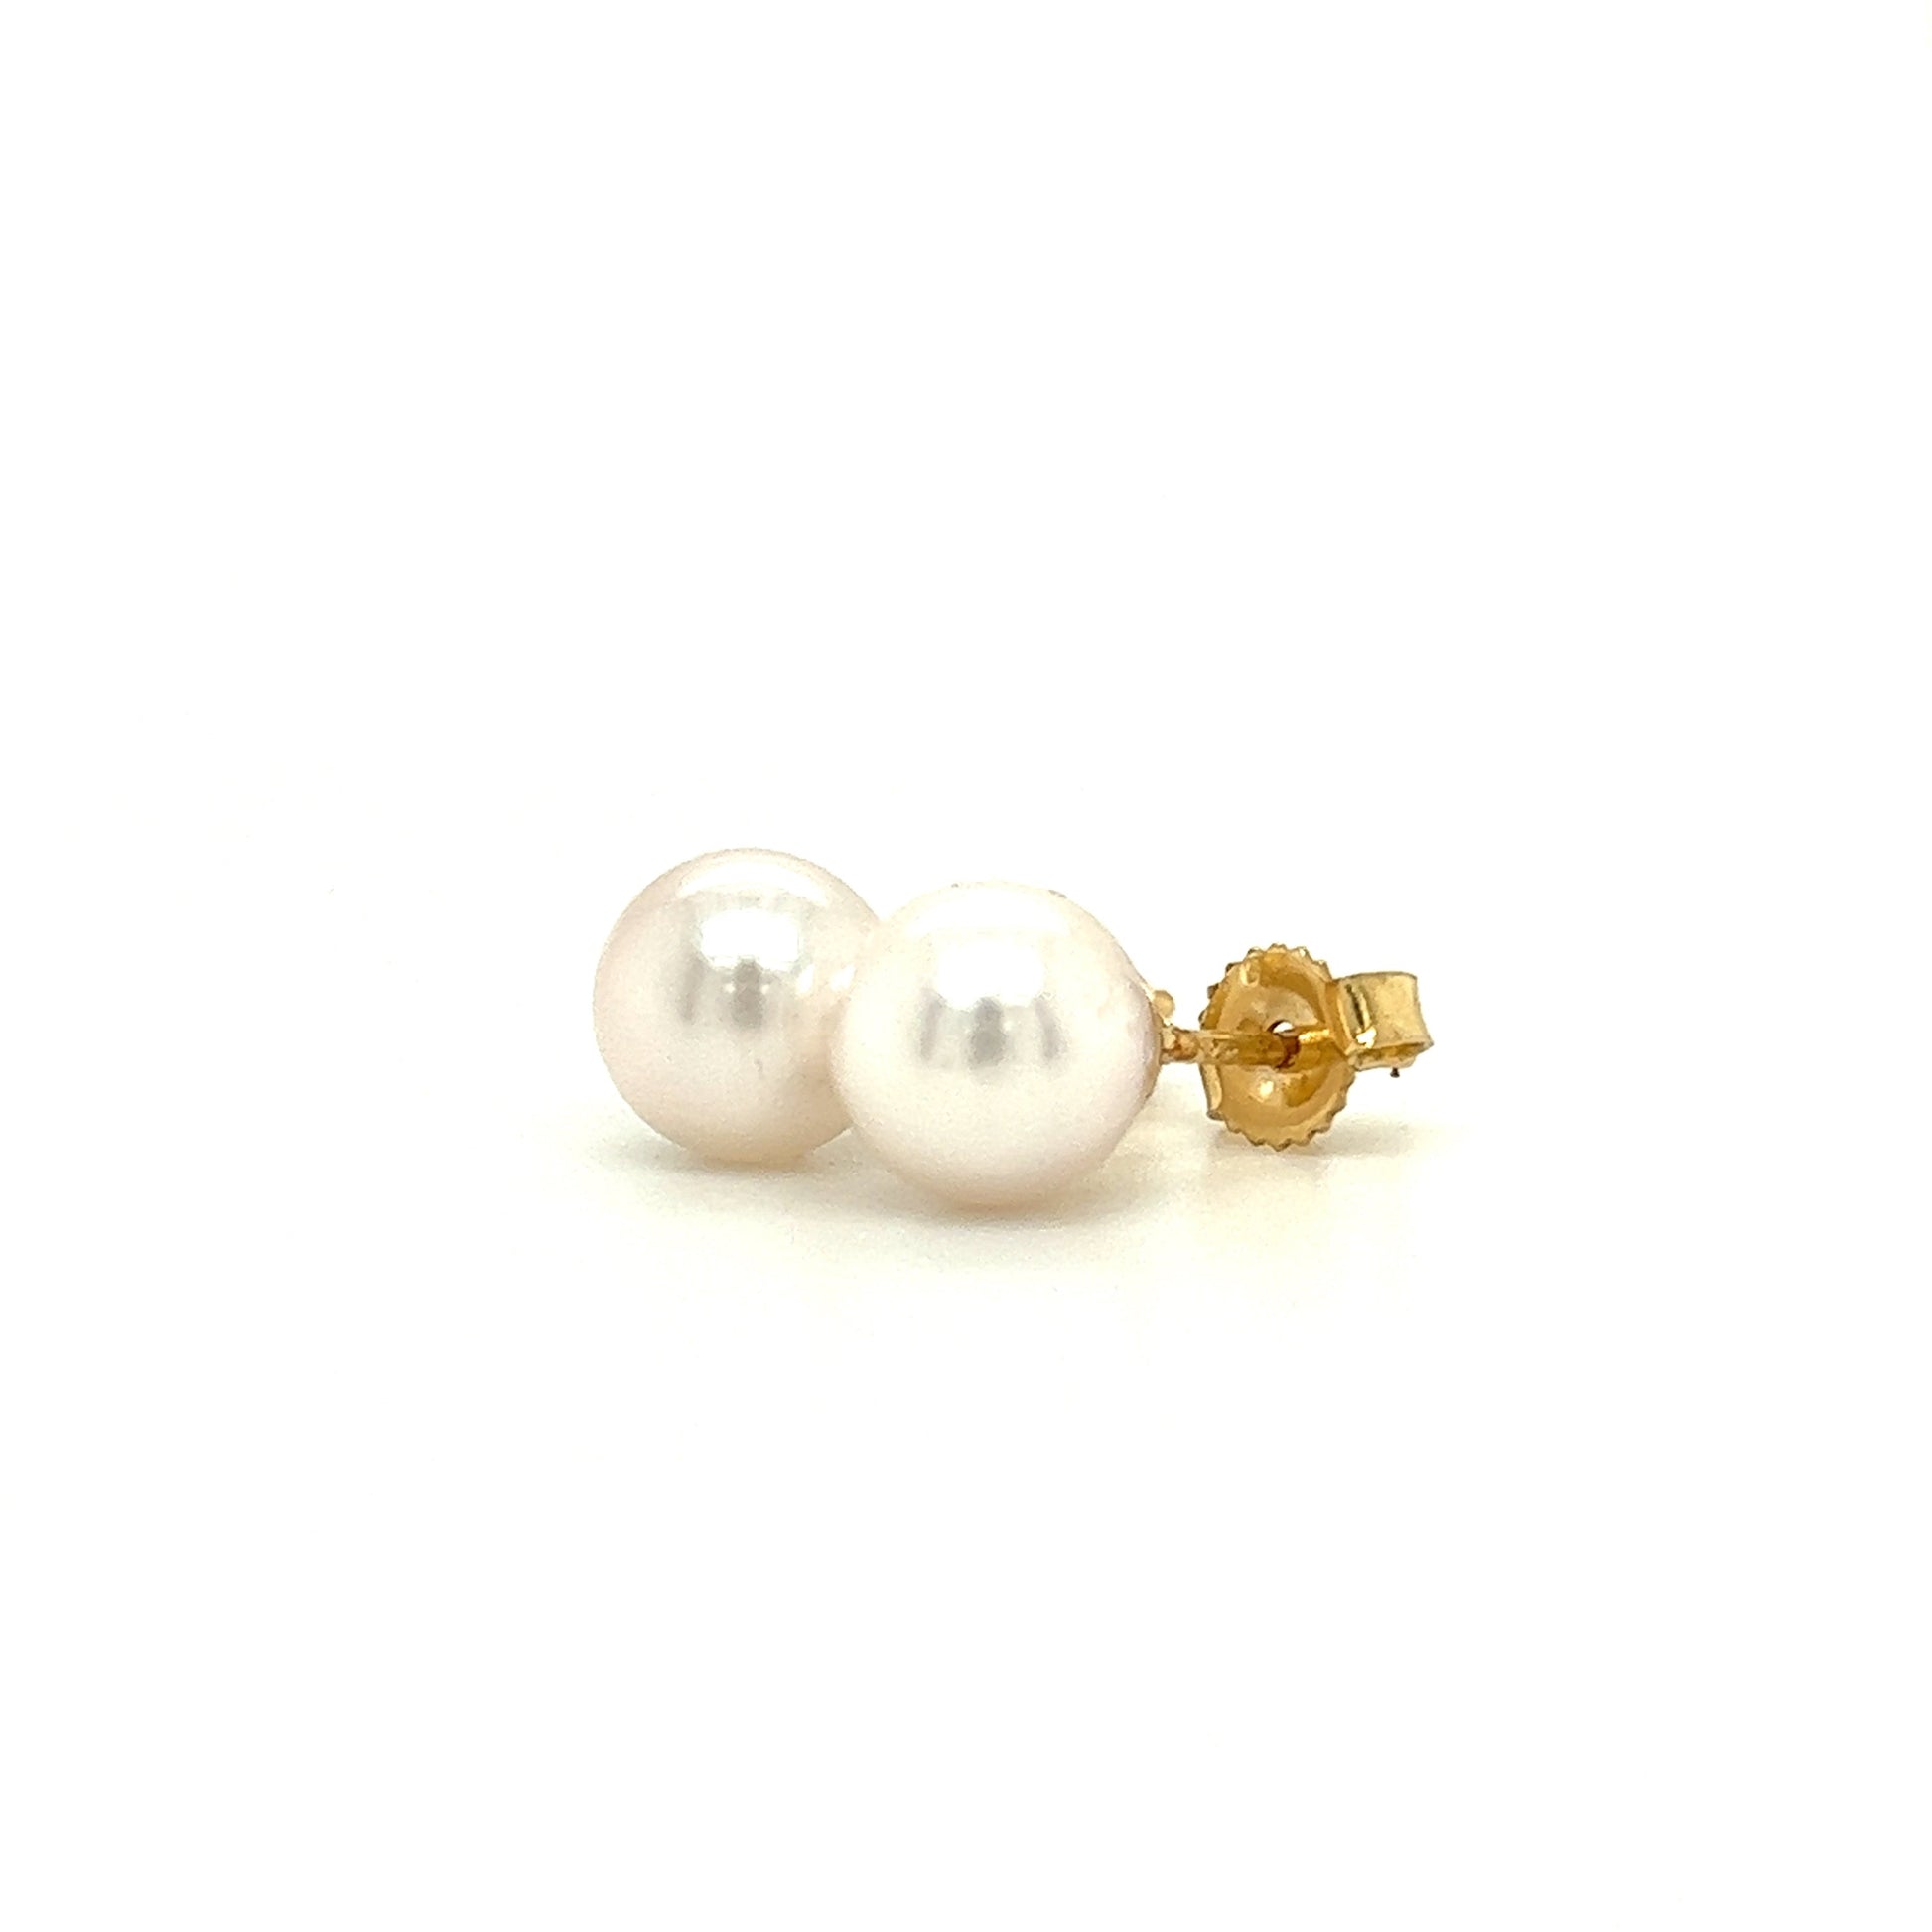 Pearl 6.5mm Stud Earrings in 14K Yellow Gold Right Side View